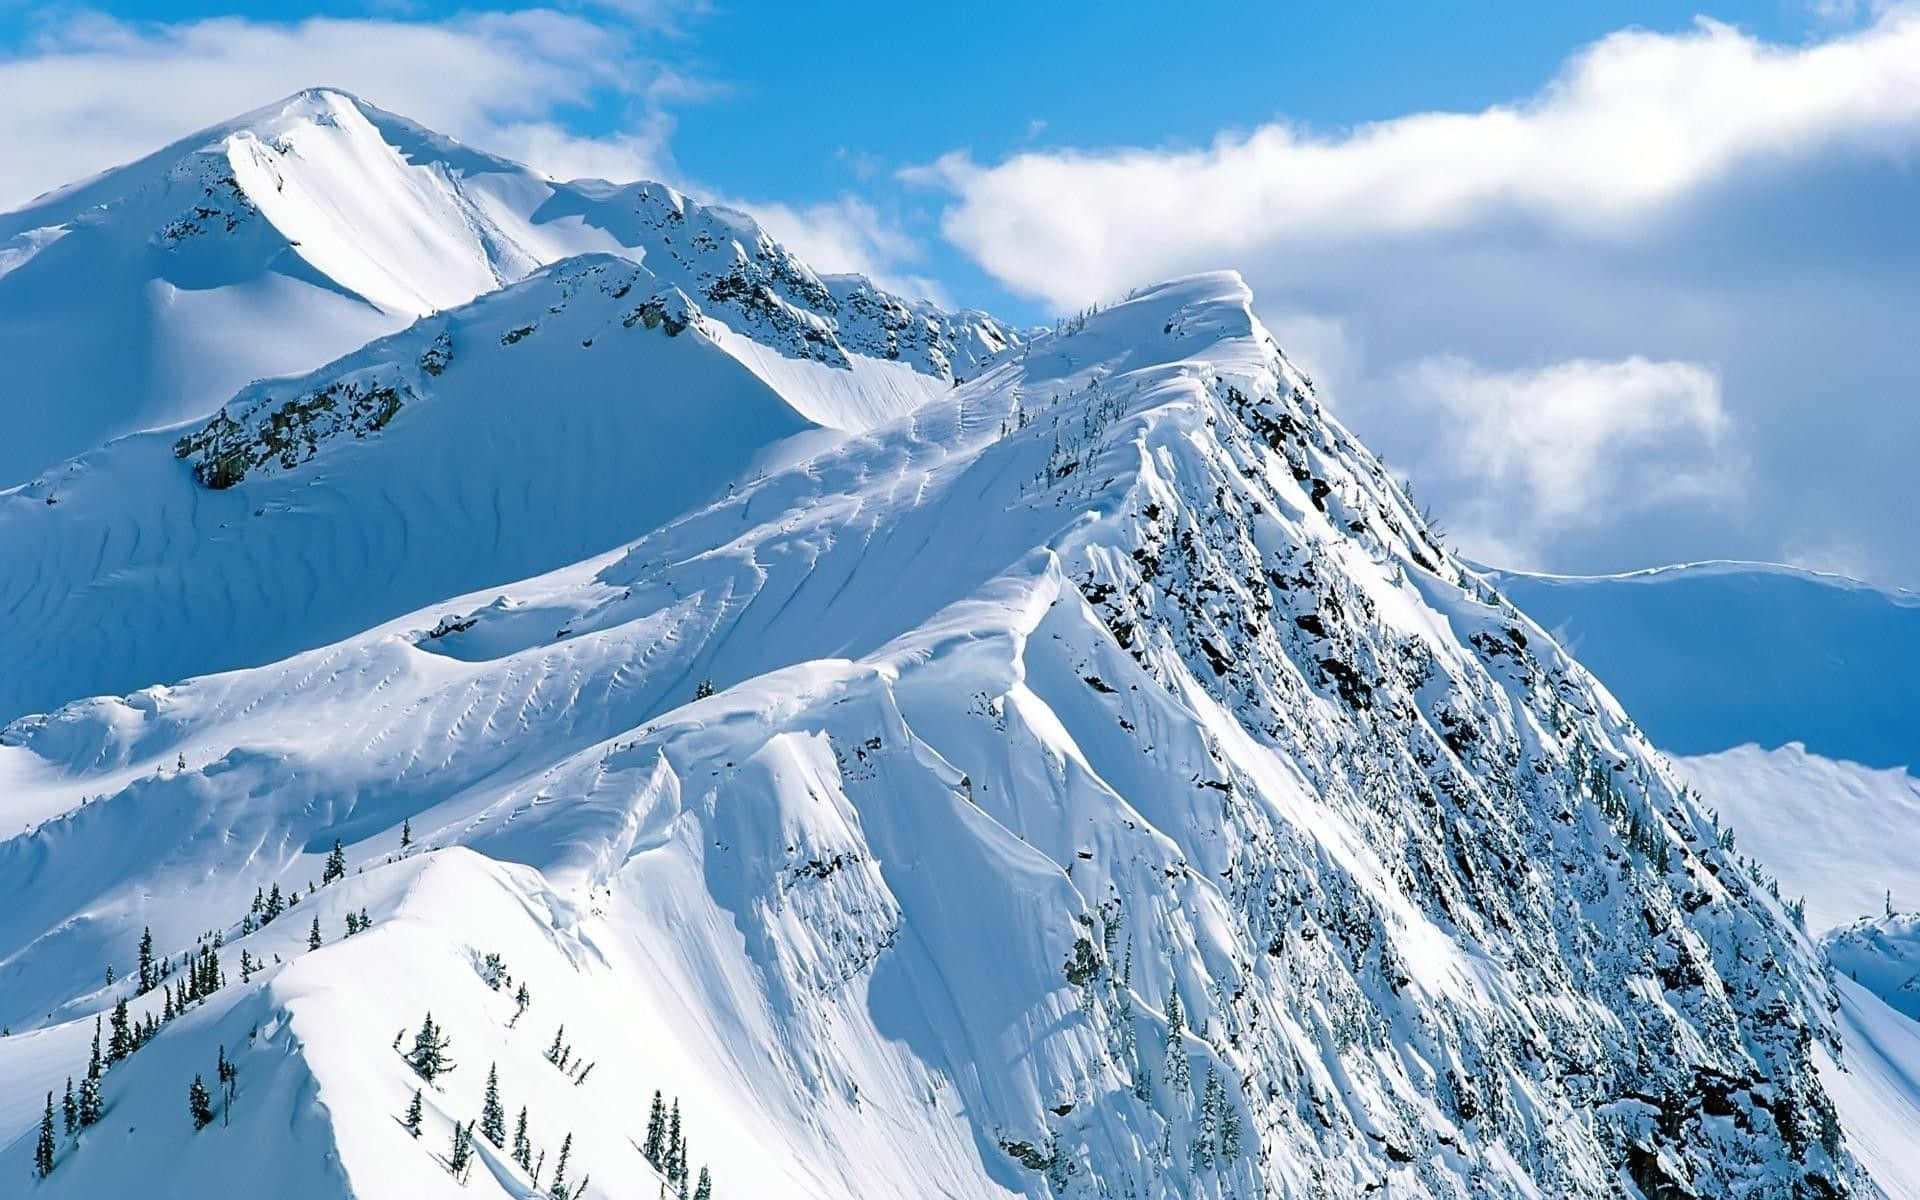 Witness nature's beauty on the Snowy Mountain!